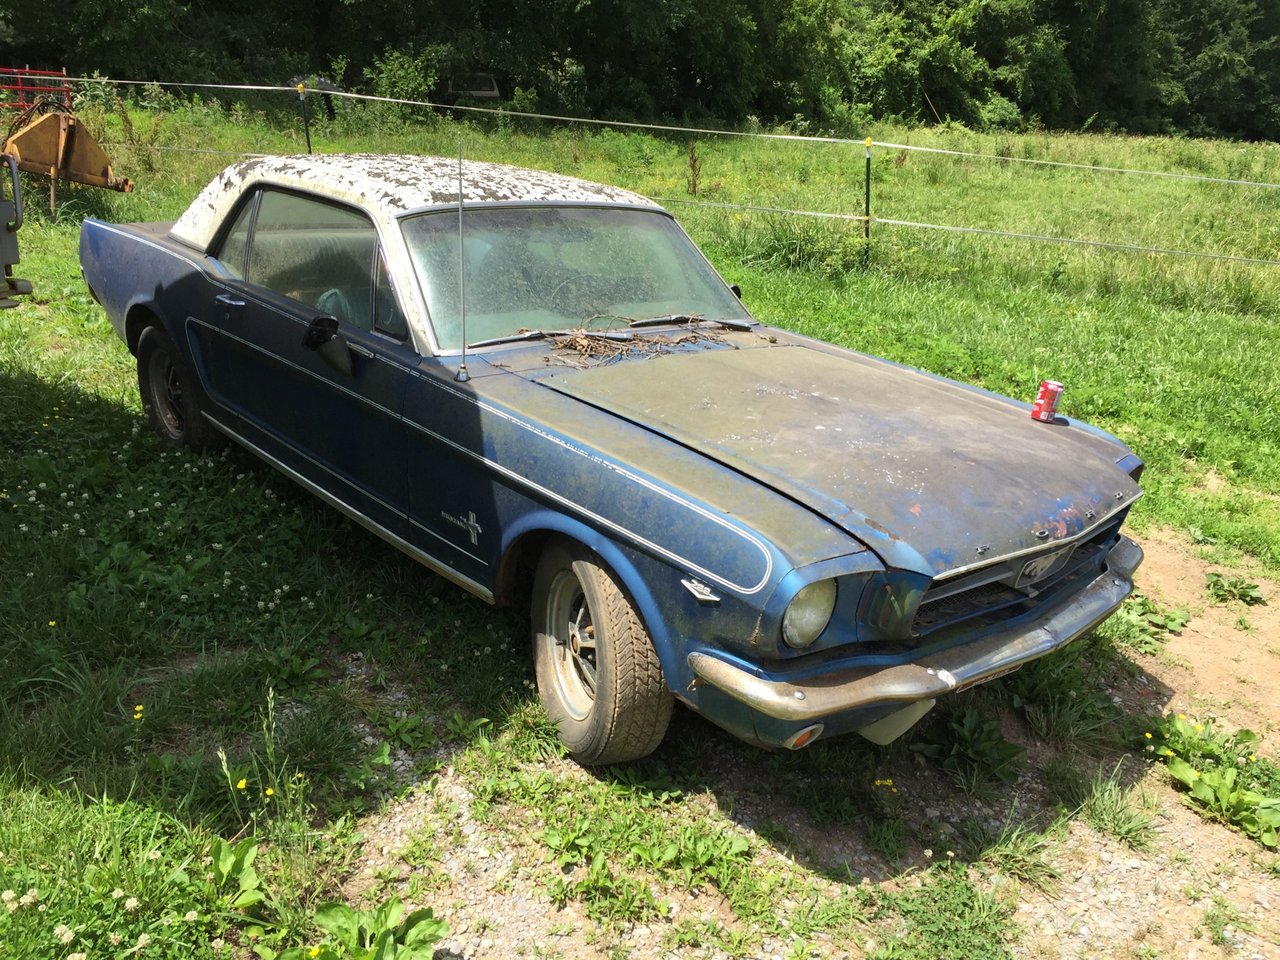 1965 Mustang Barn Find: 1965 Mustang A Code 4 Speed Factory Air Pony Interior Equalock